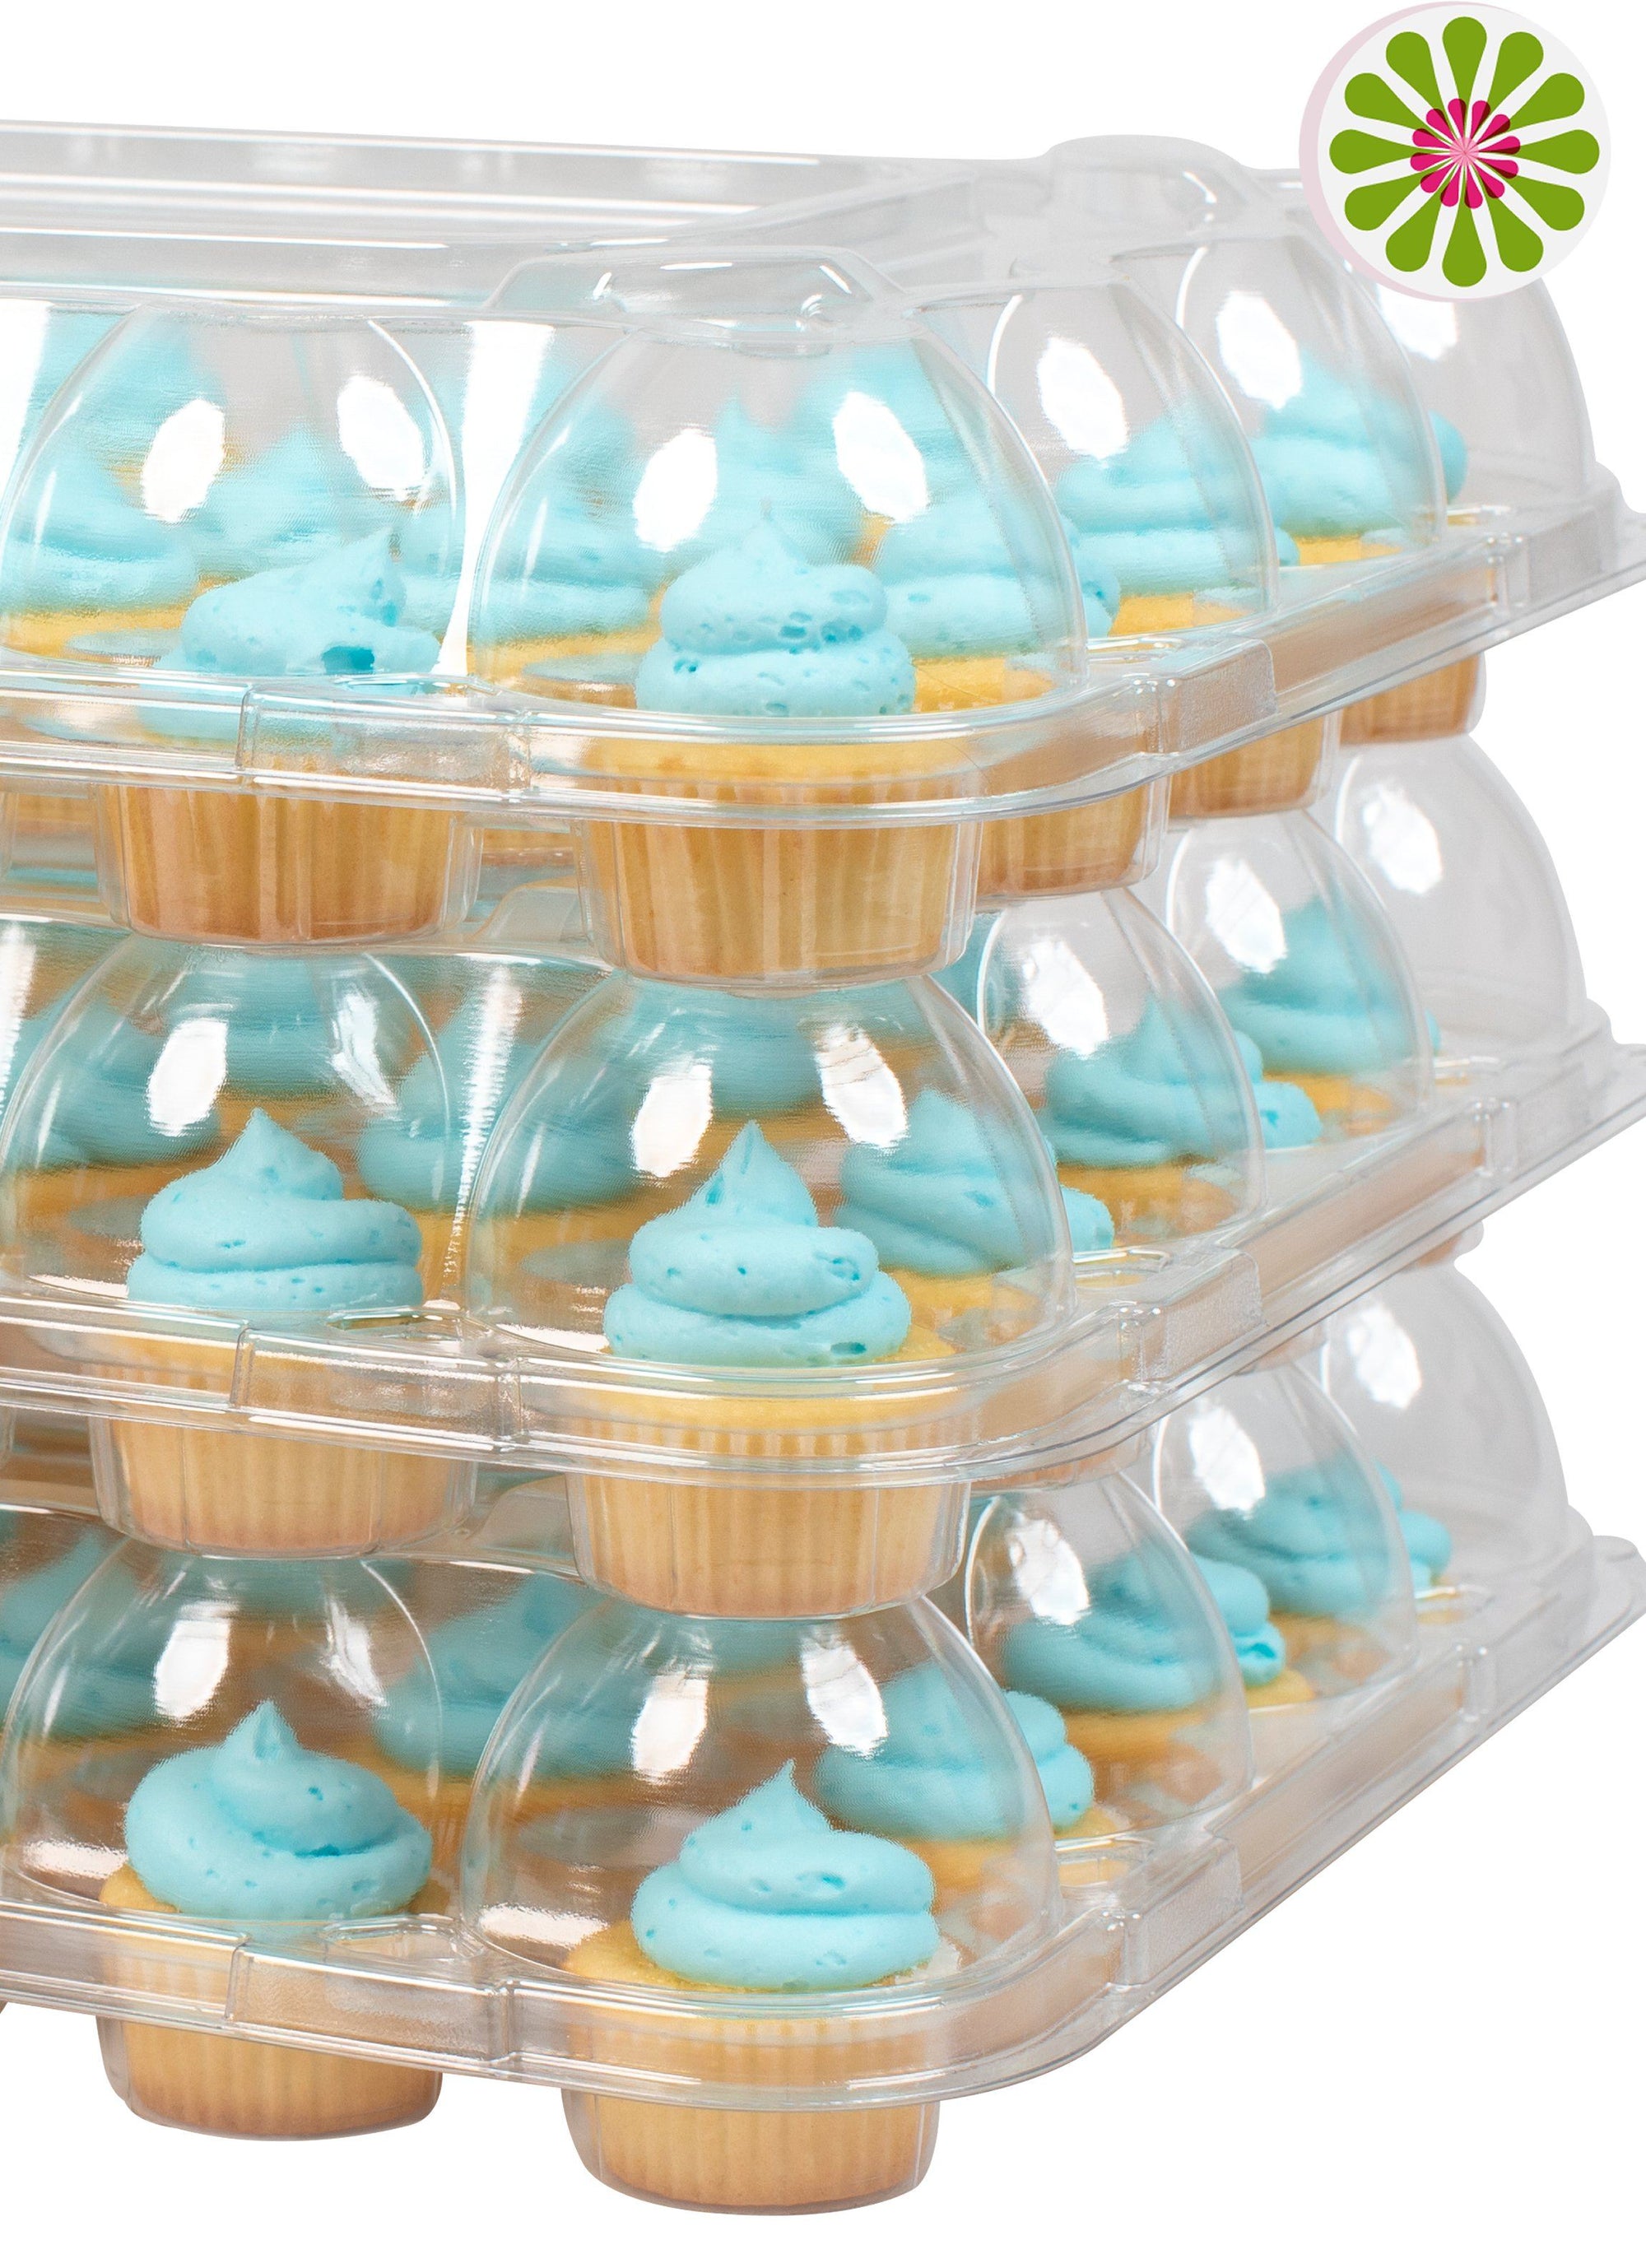 Stack'n Go Cupcake Containers Deliverr 